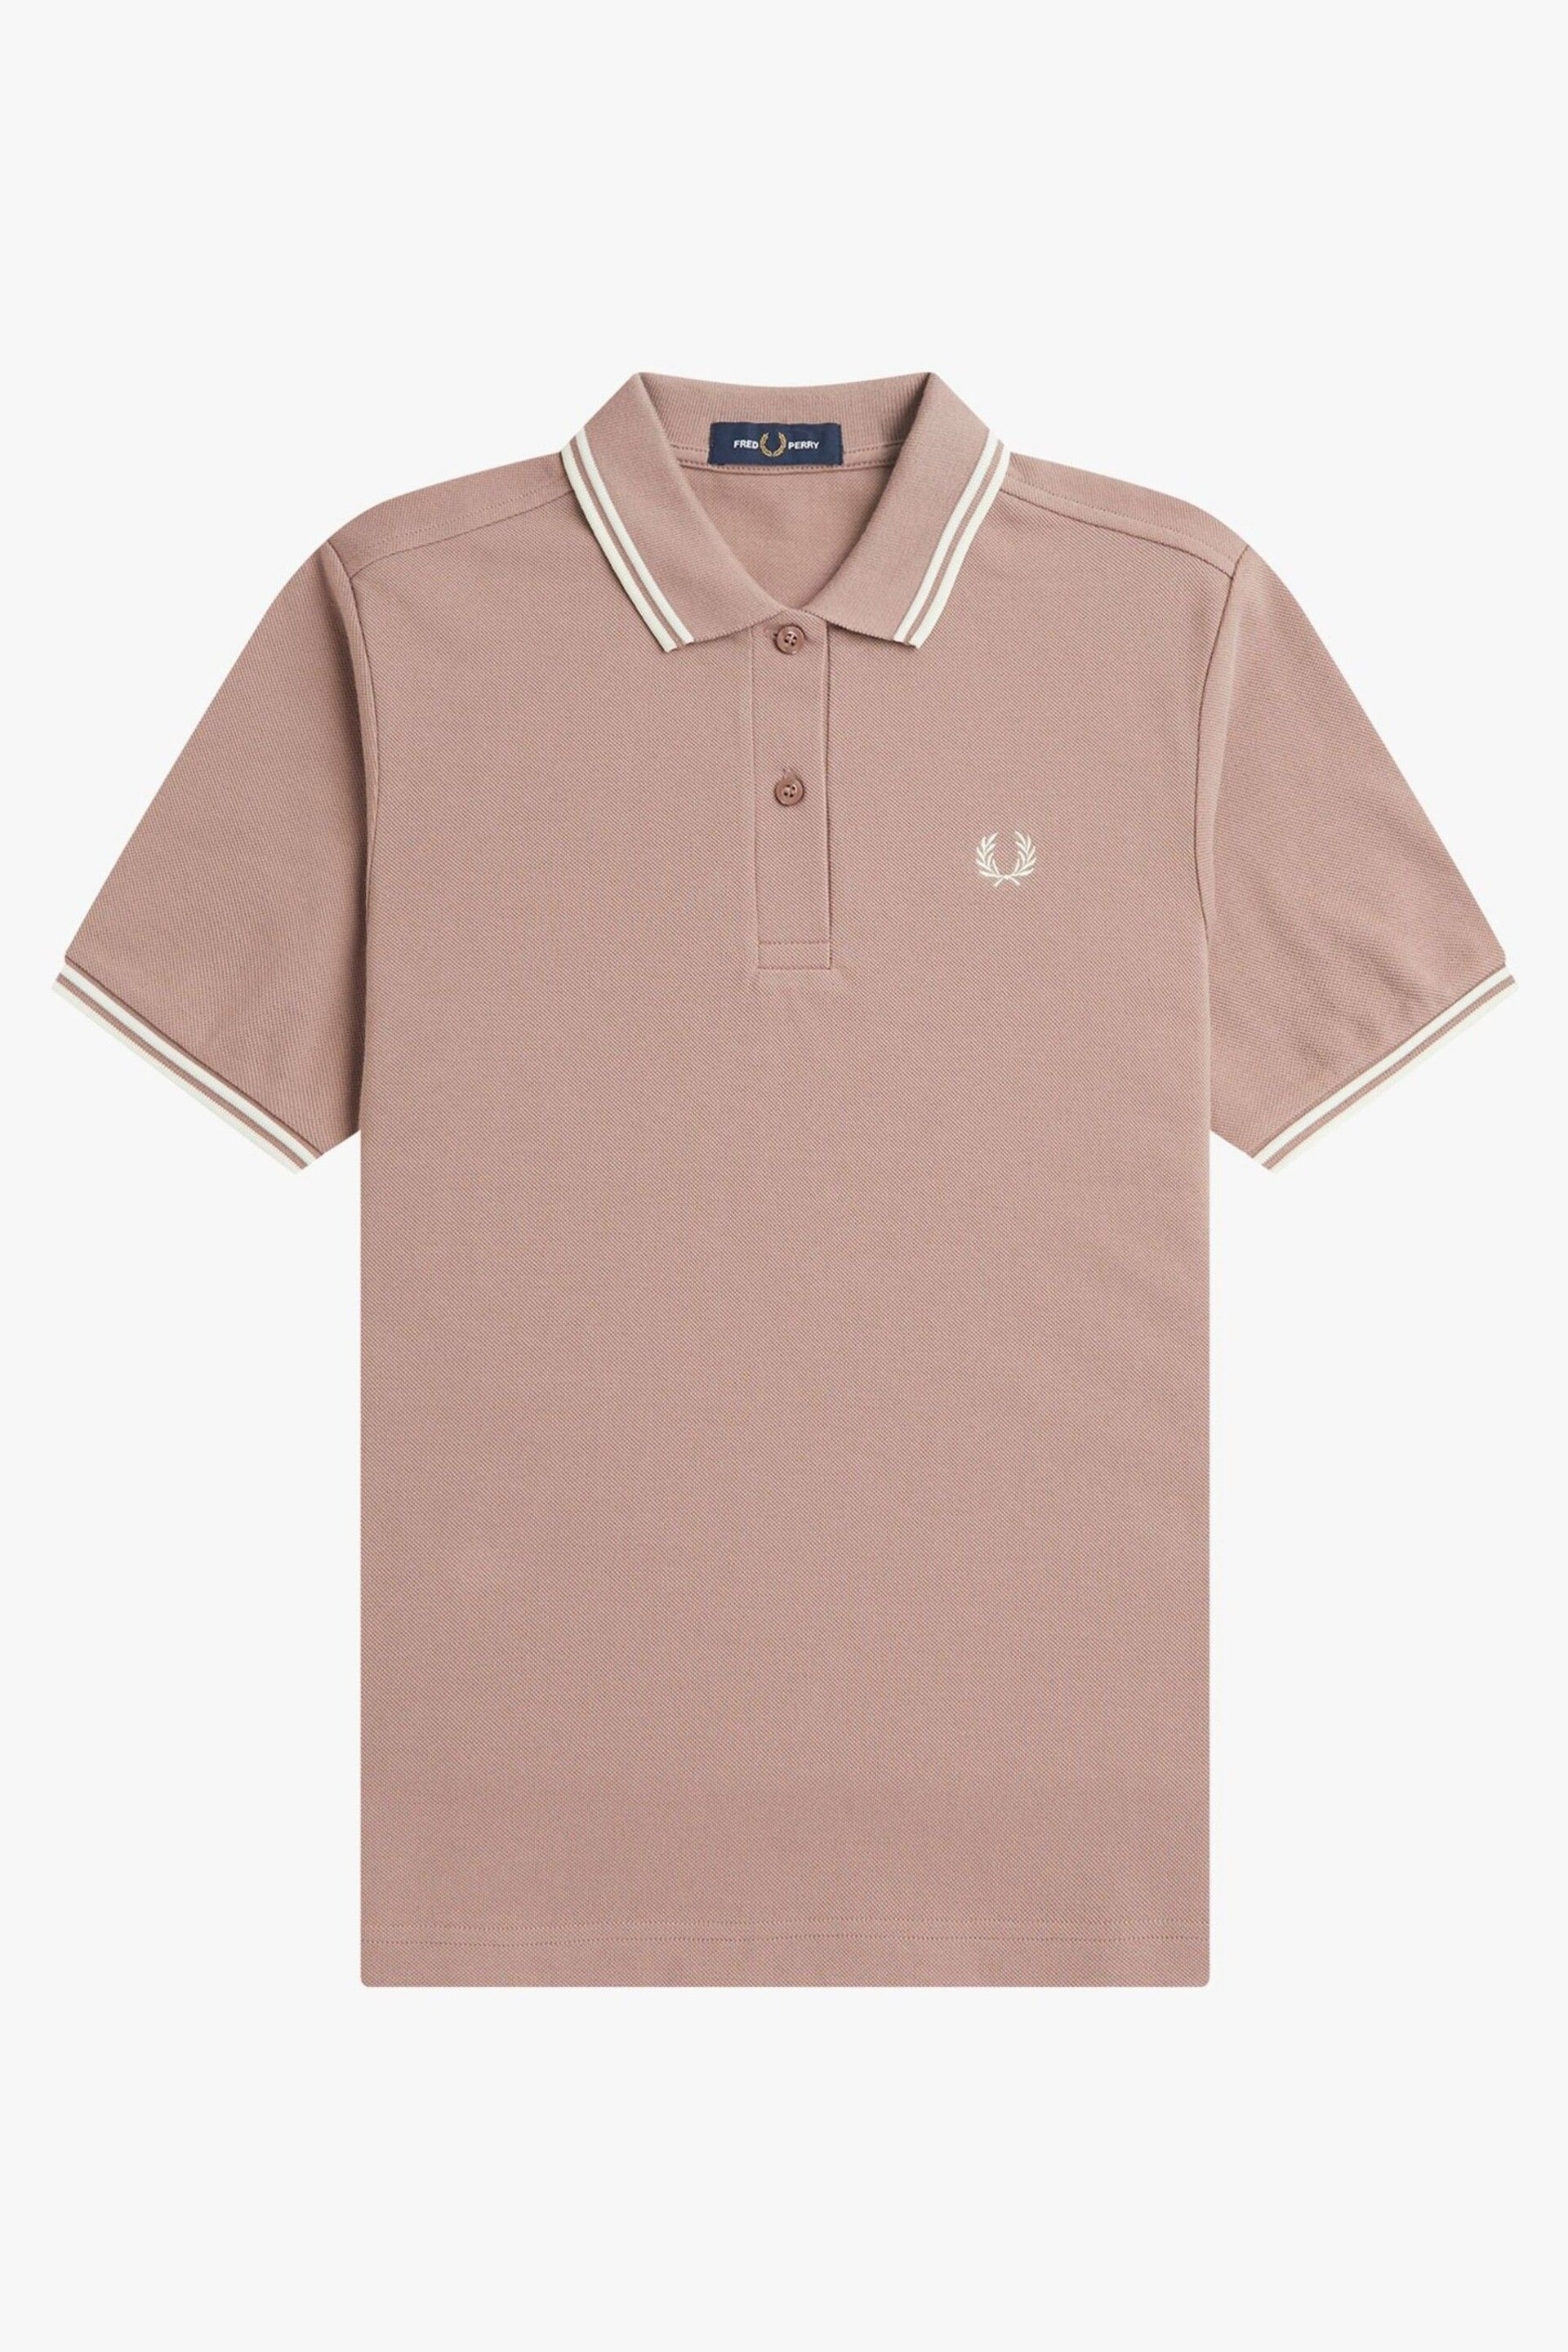 Fred Perry Twin Tipped Polo Shirt - Image 1 of 5